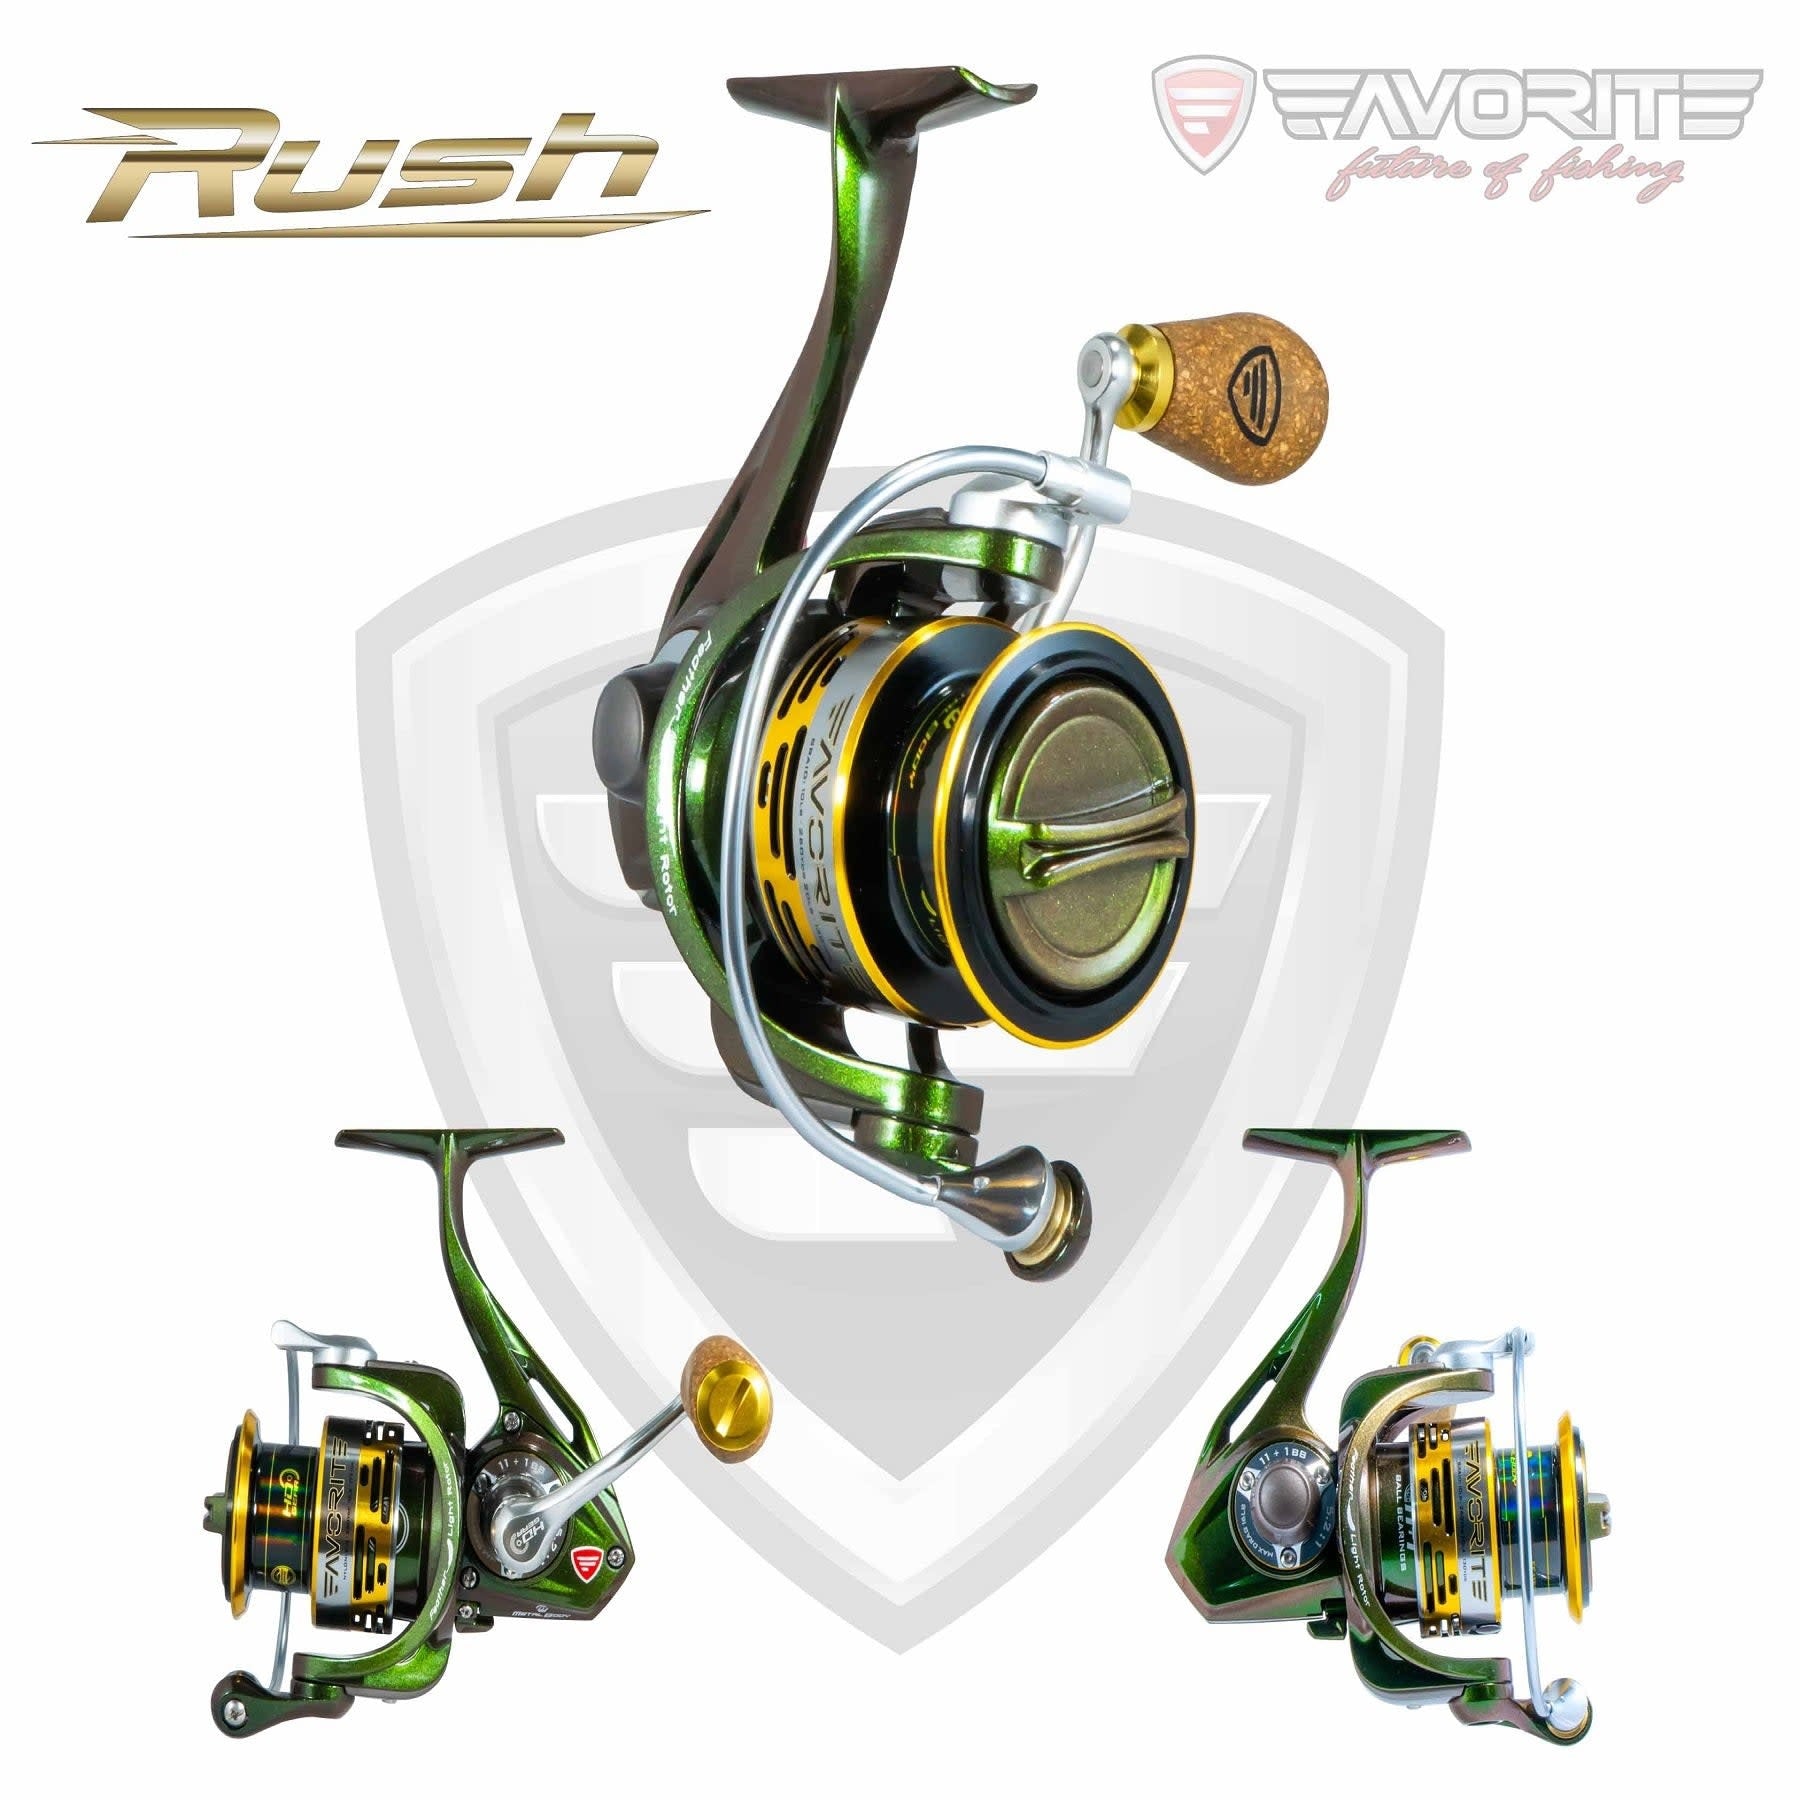 Favorite Rush Spinning Reel - Hamilton Bait and Tackle